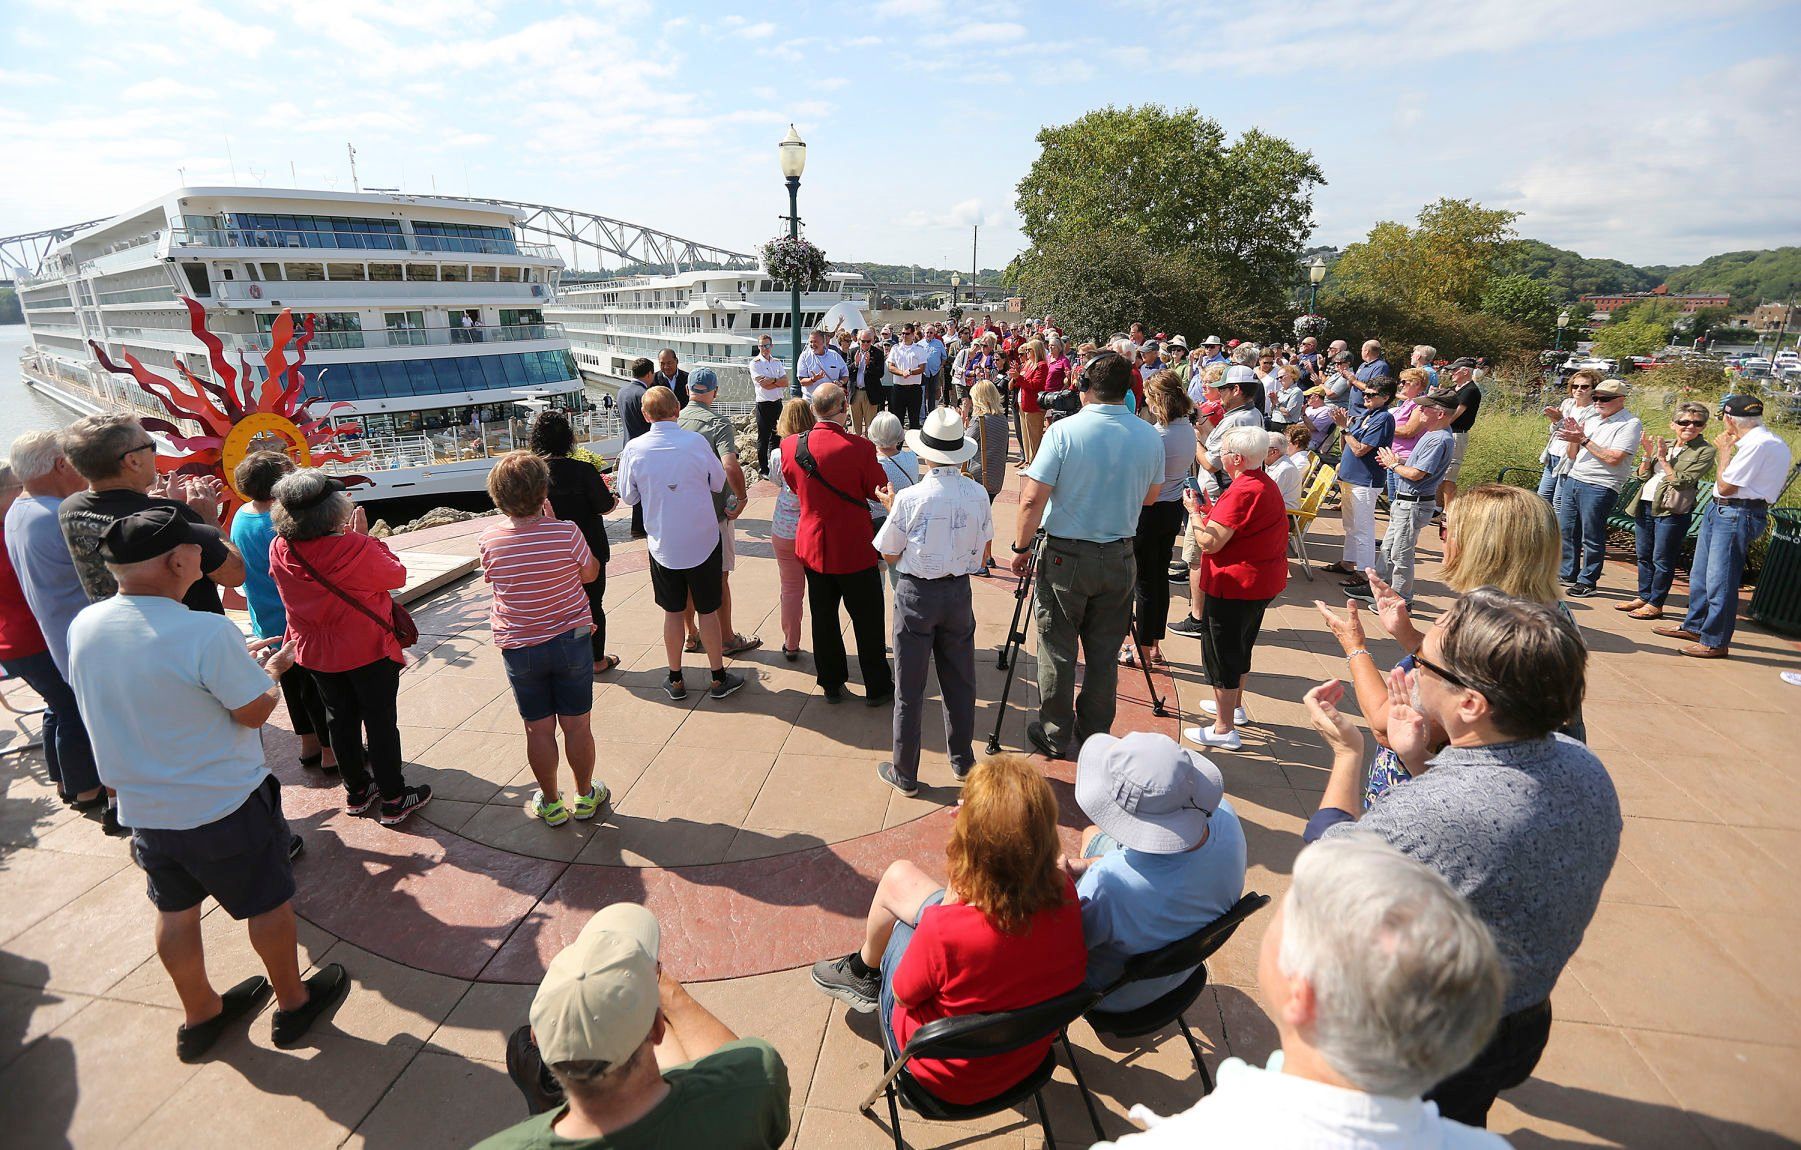 People gather at the Port of Dubuque for a ribbon-cutting for the Viking Mississippi cruise ship that docked for the first time on Tuesday, Sept. 6, 2022.    PHOTO CREDIT: Dave Kettering